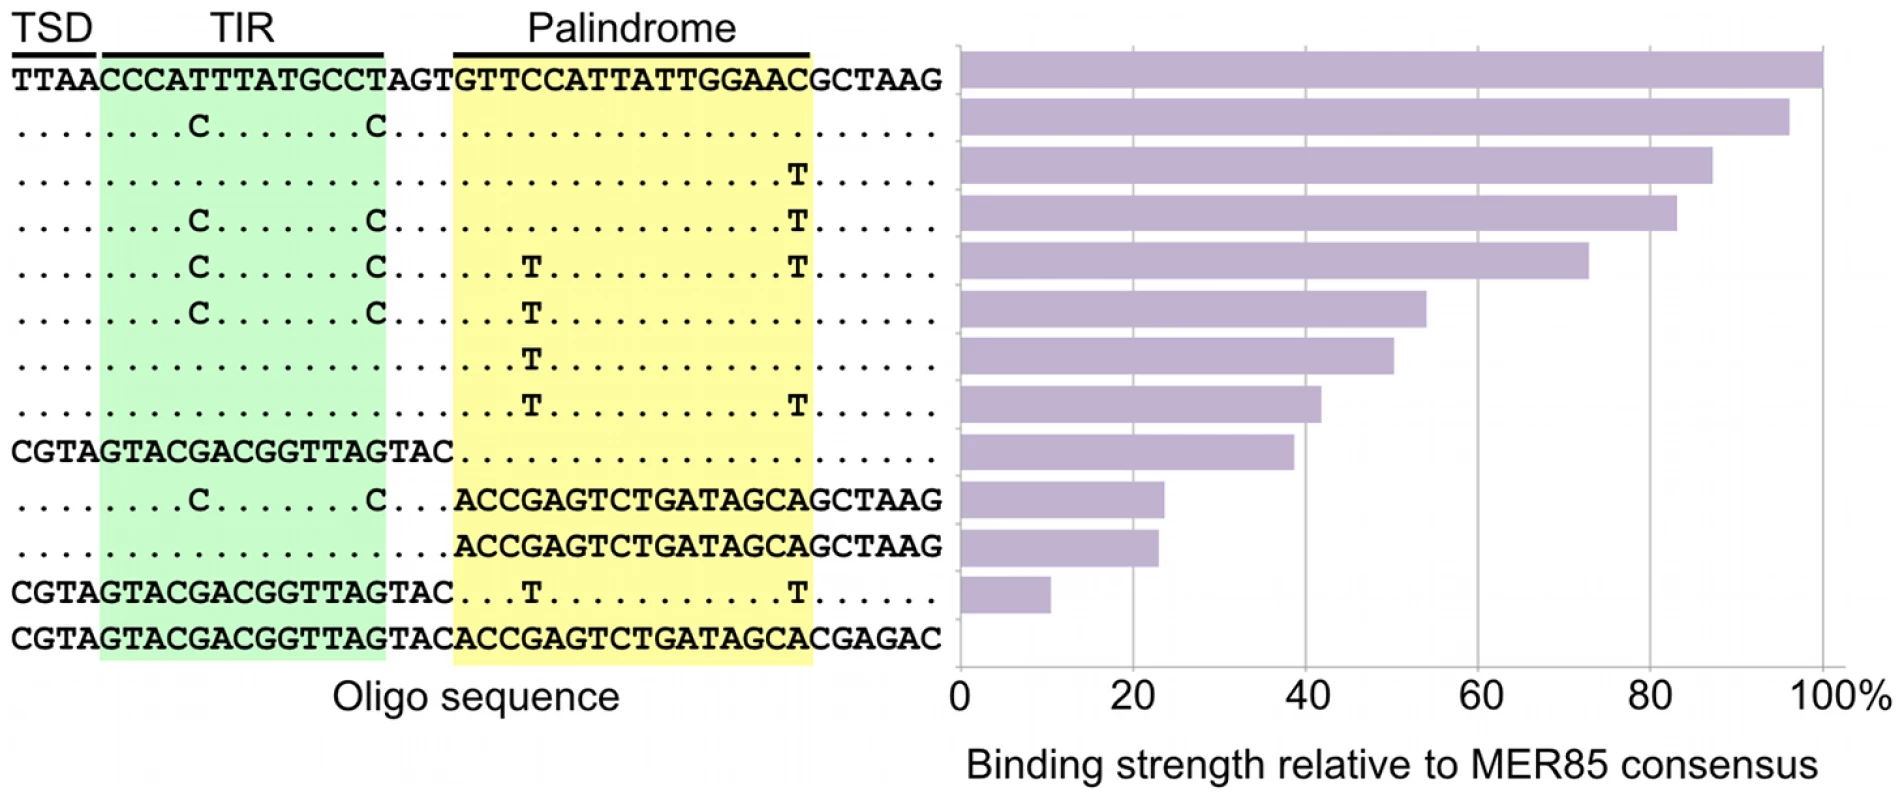 Mutations in the palindromic region reduce PGBD3 transposase binding affinity for MER85s.